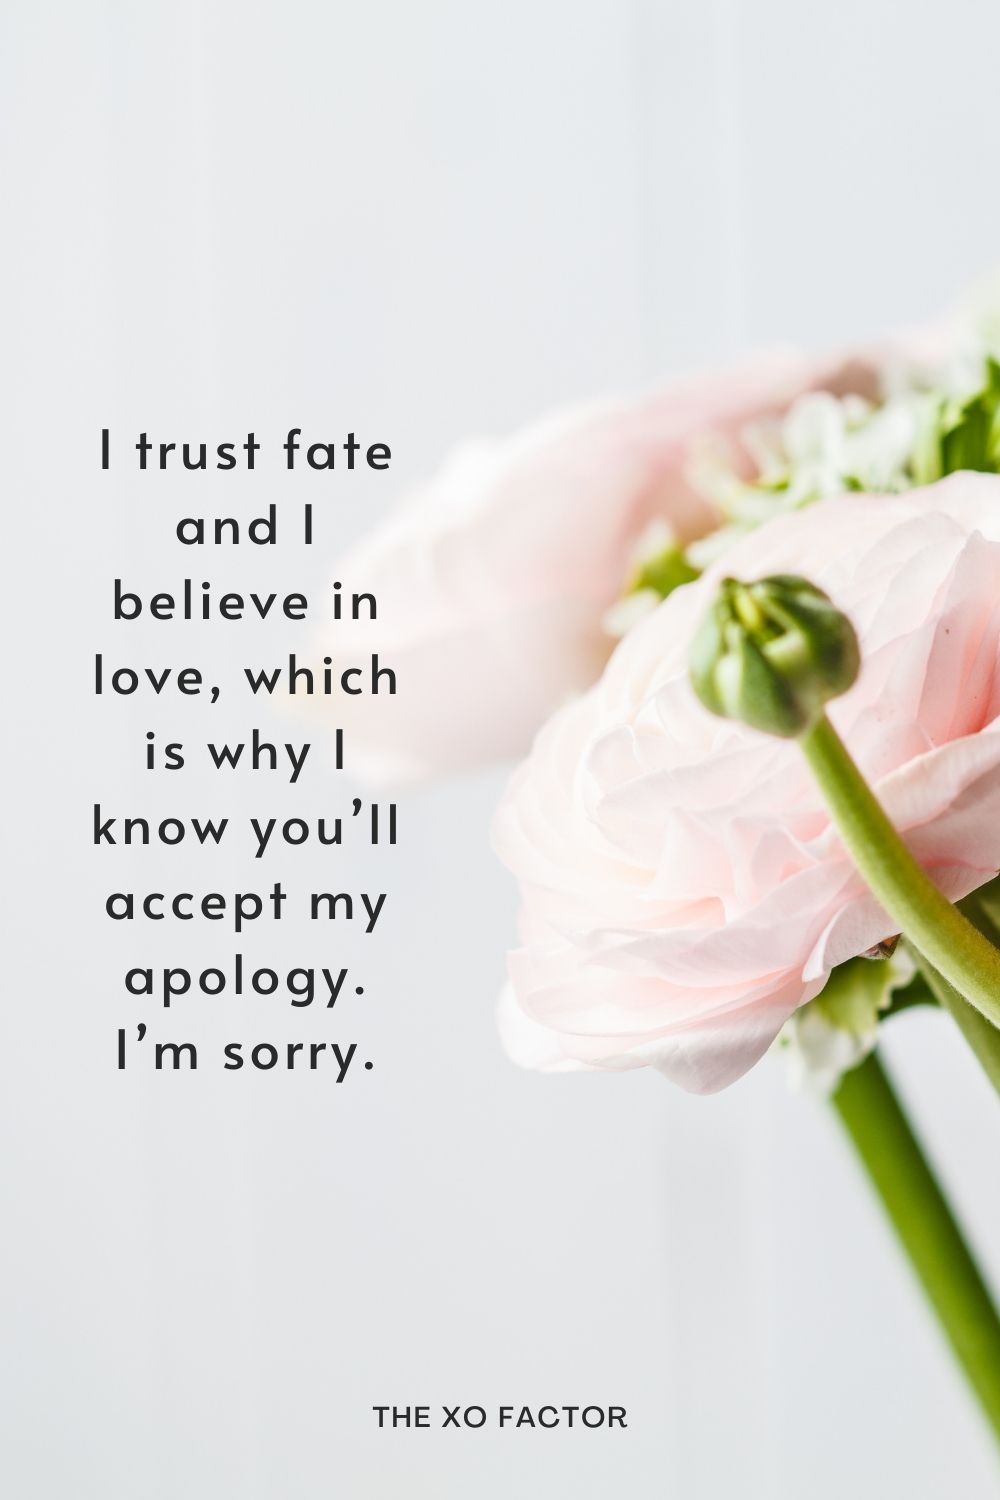 I trust fate and I believe in love, which is why I know you’ll accept my apology. I’m sorry.